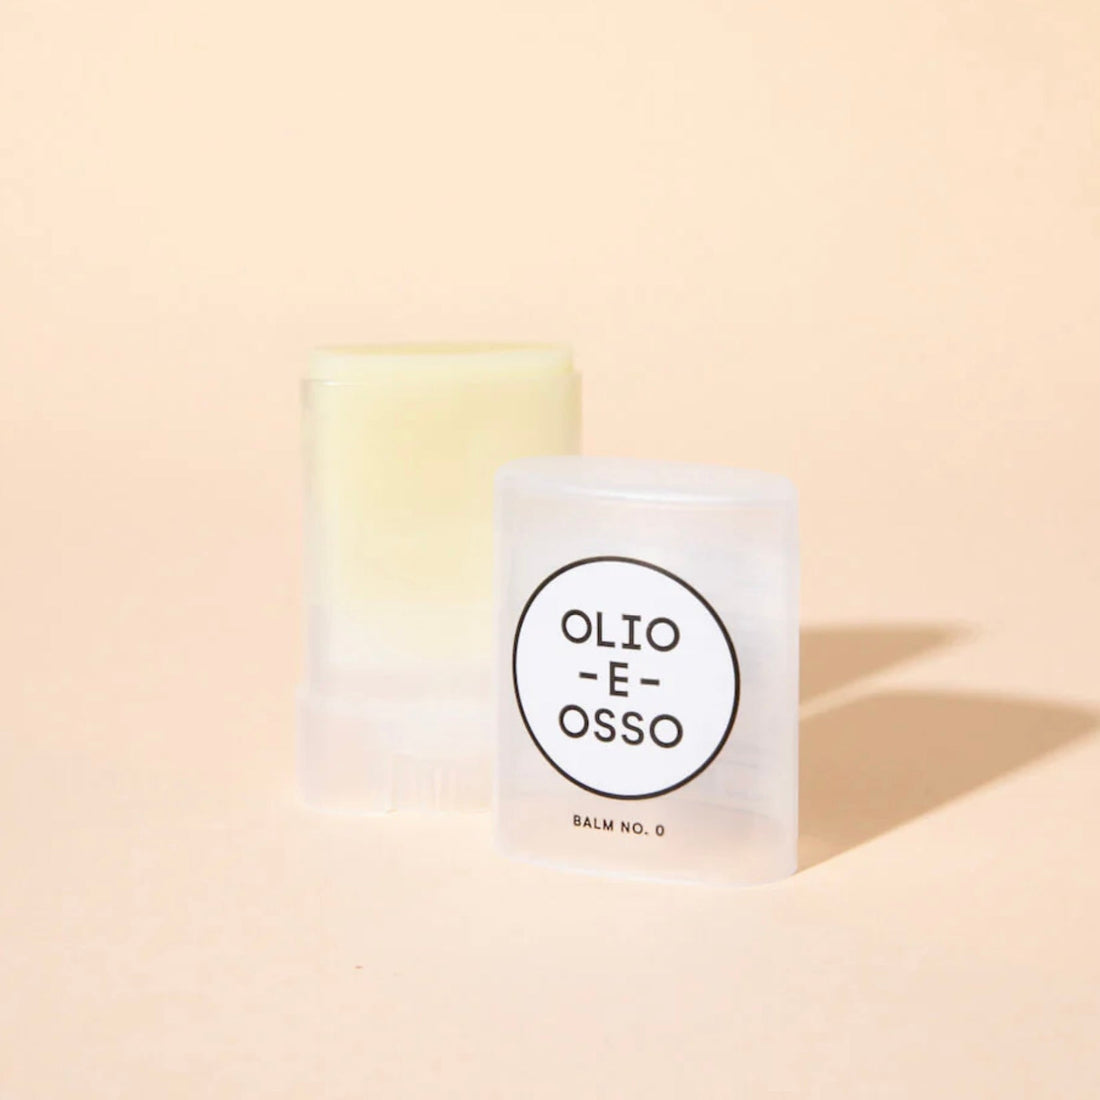 Olio E Osso - Menthol Balm - The Flower Crate